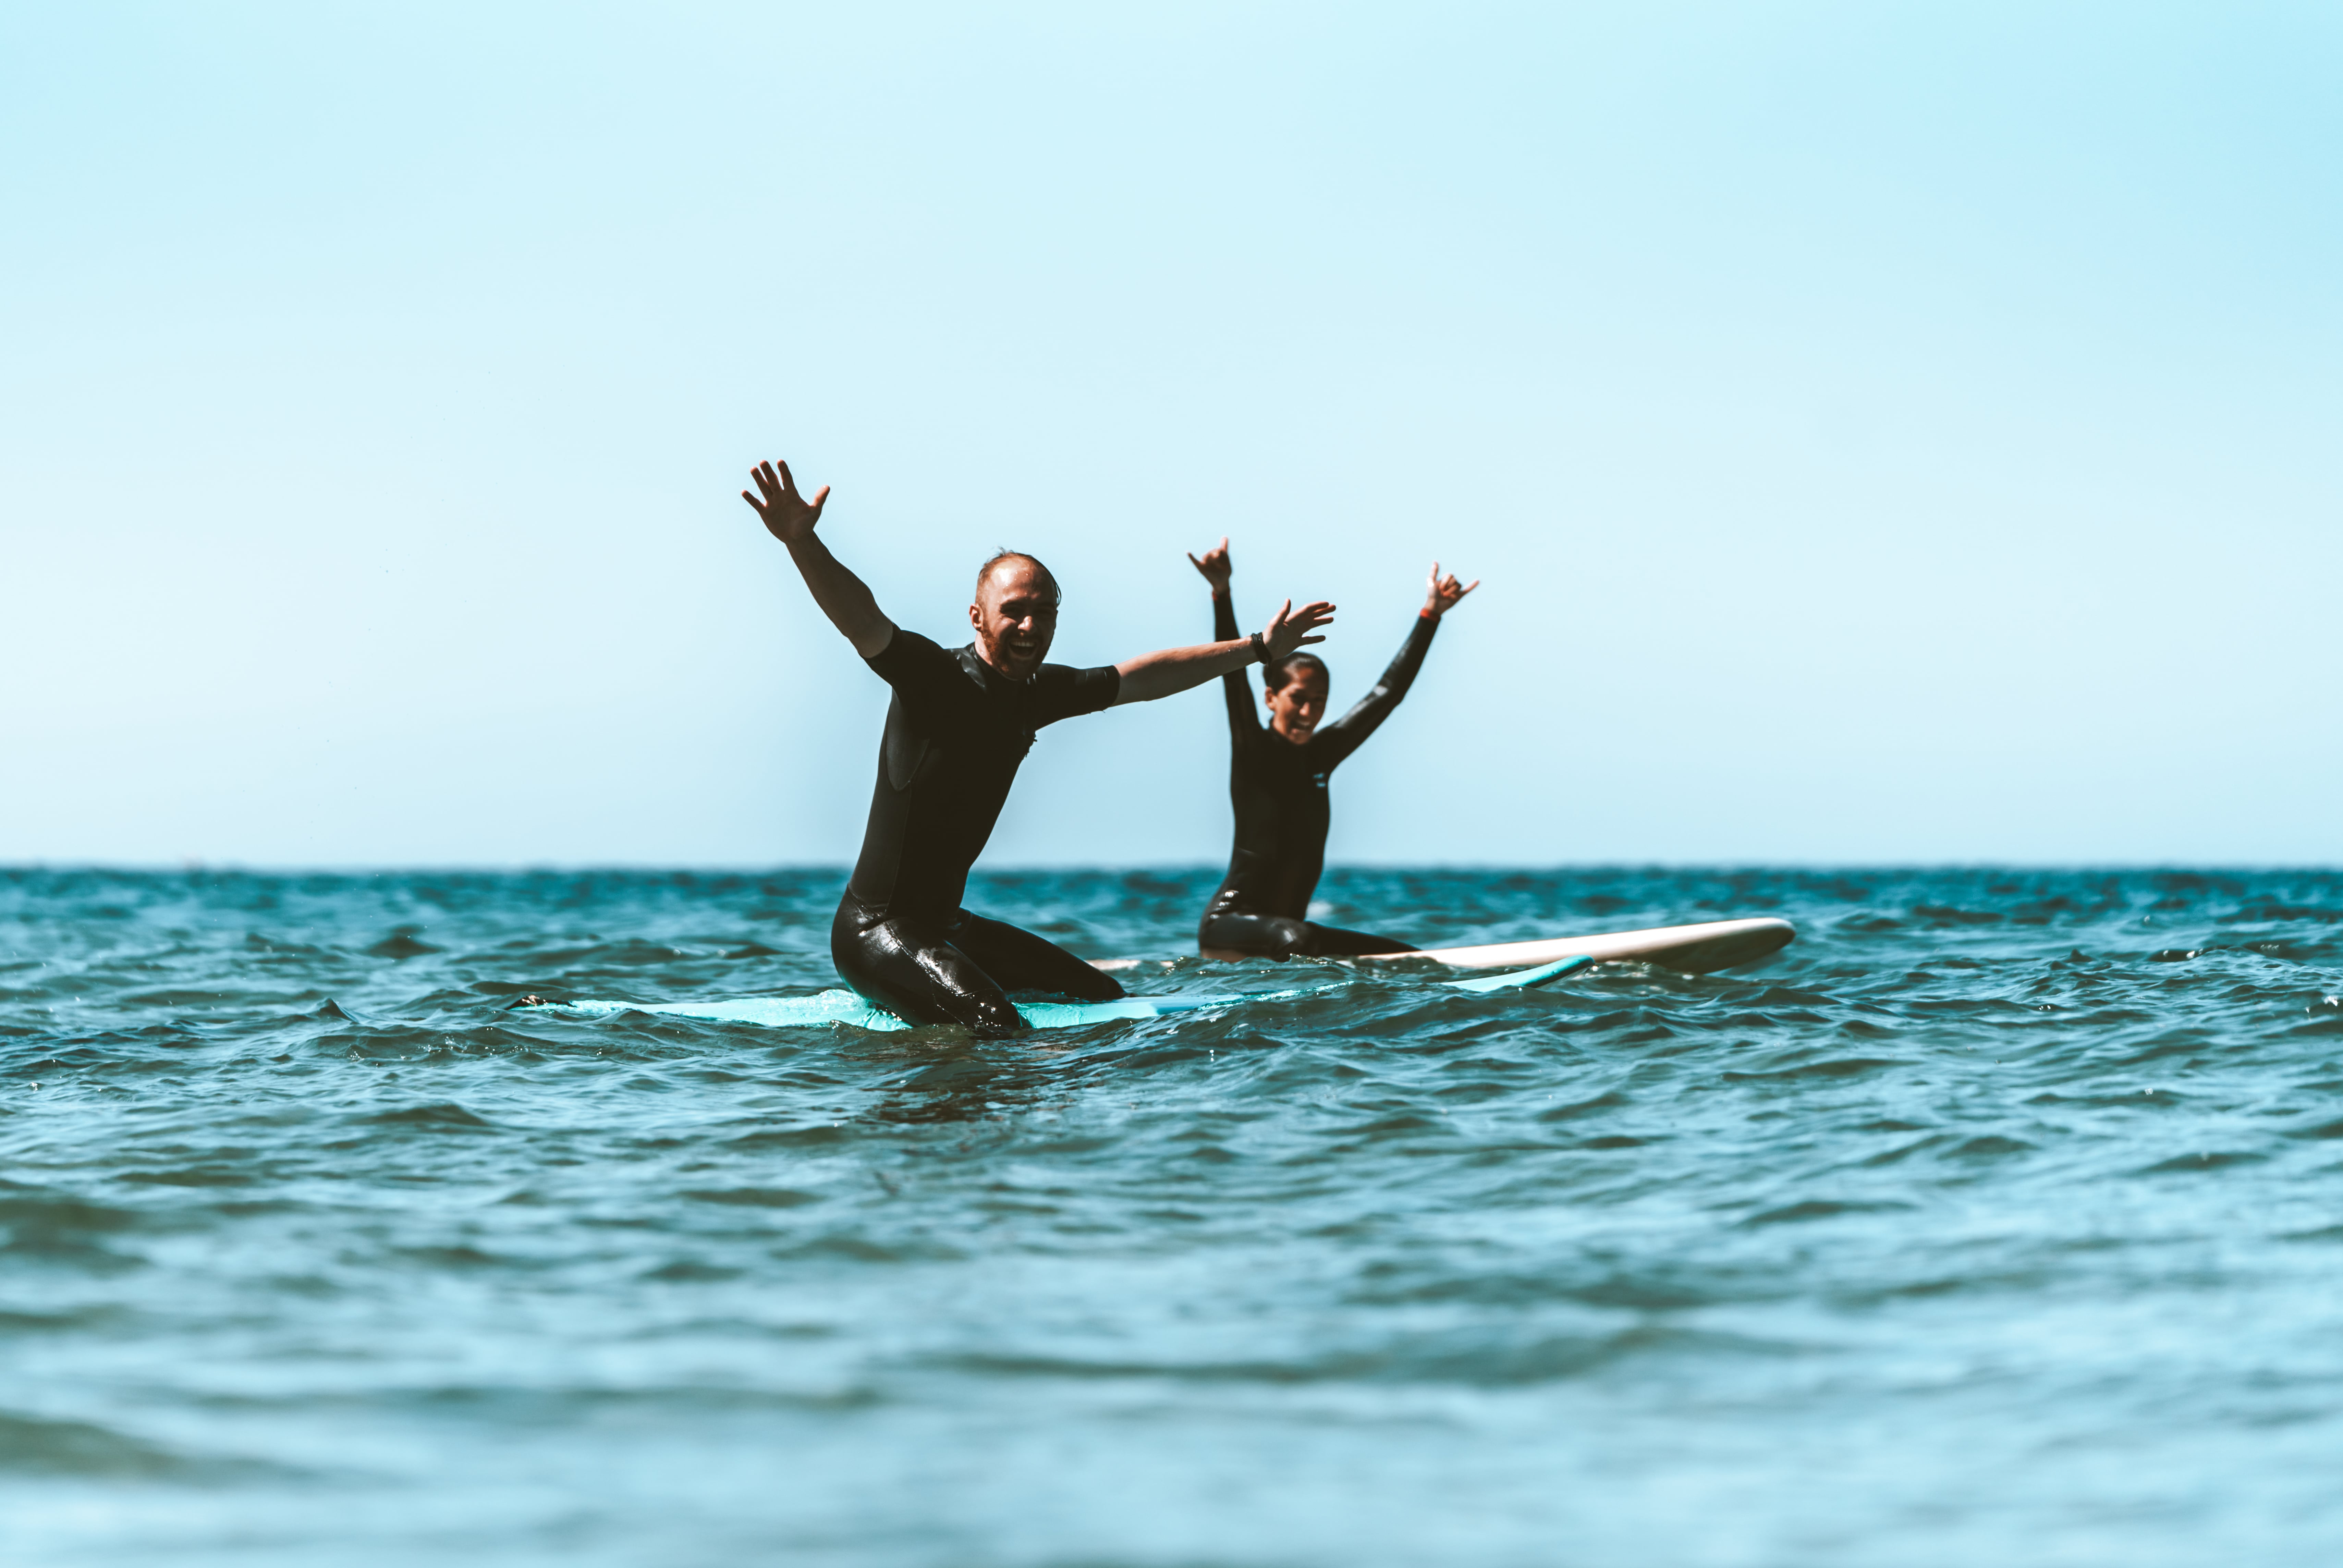 How to Read Surf Forecast & What Makes It a Great Day to Surf? - Lapoint  Surf camps